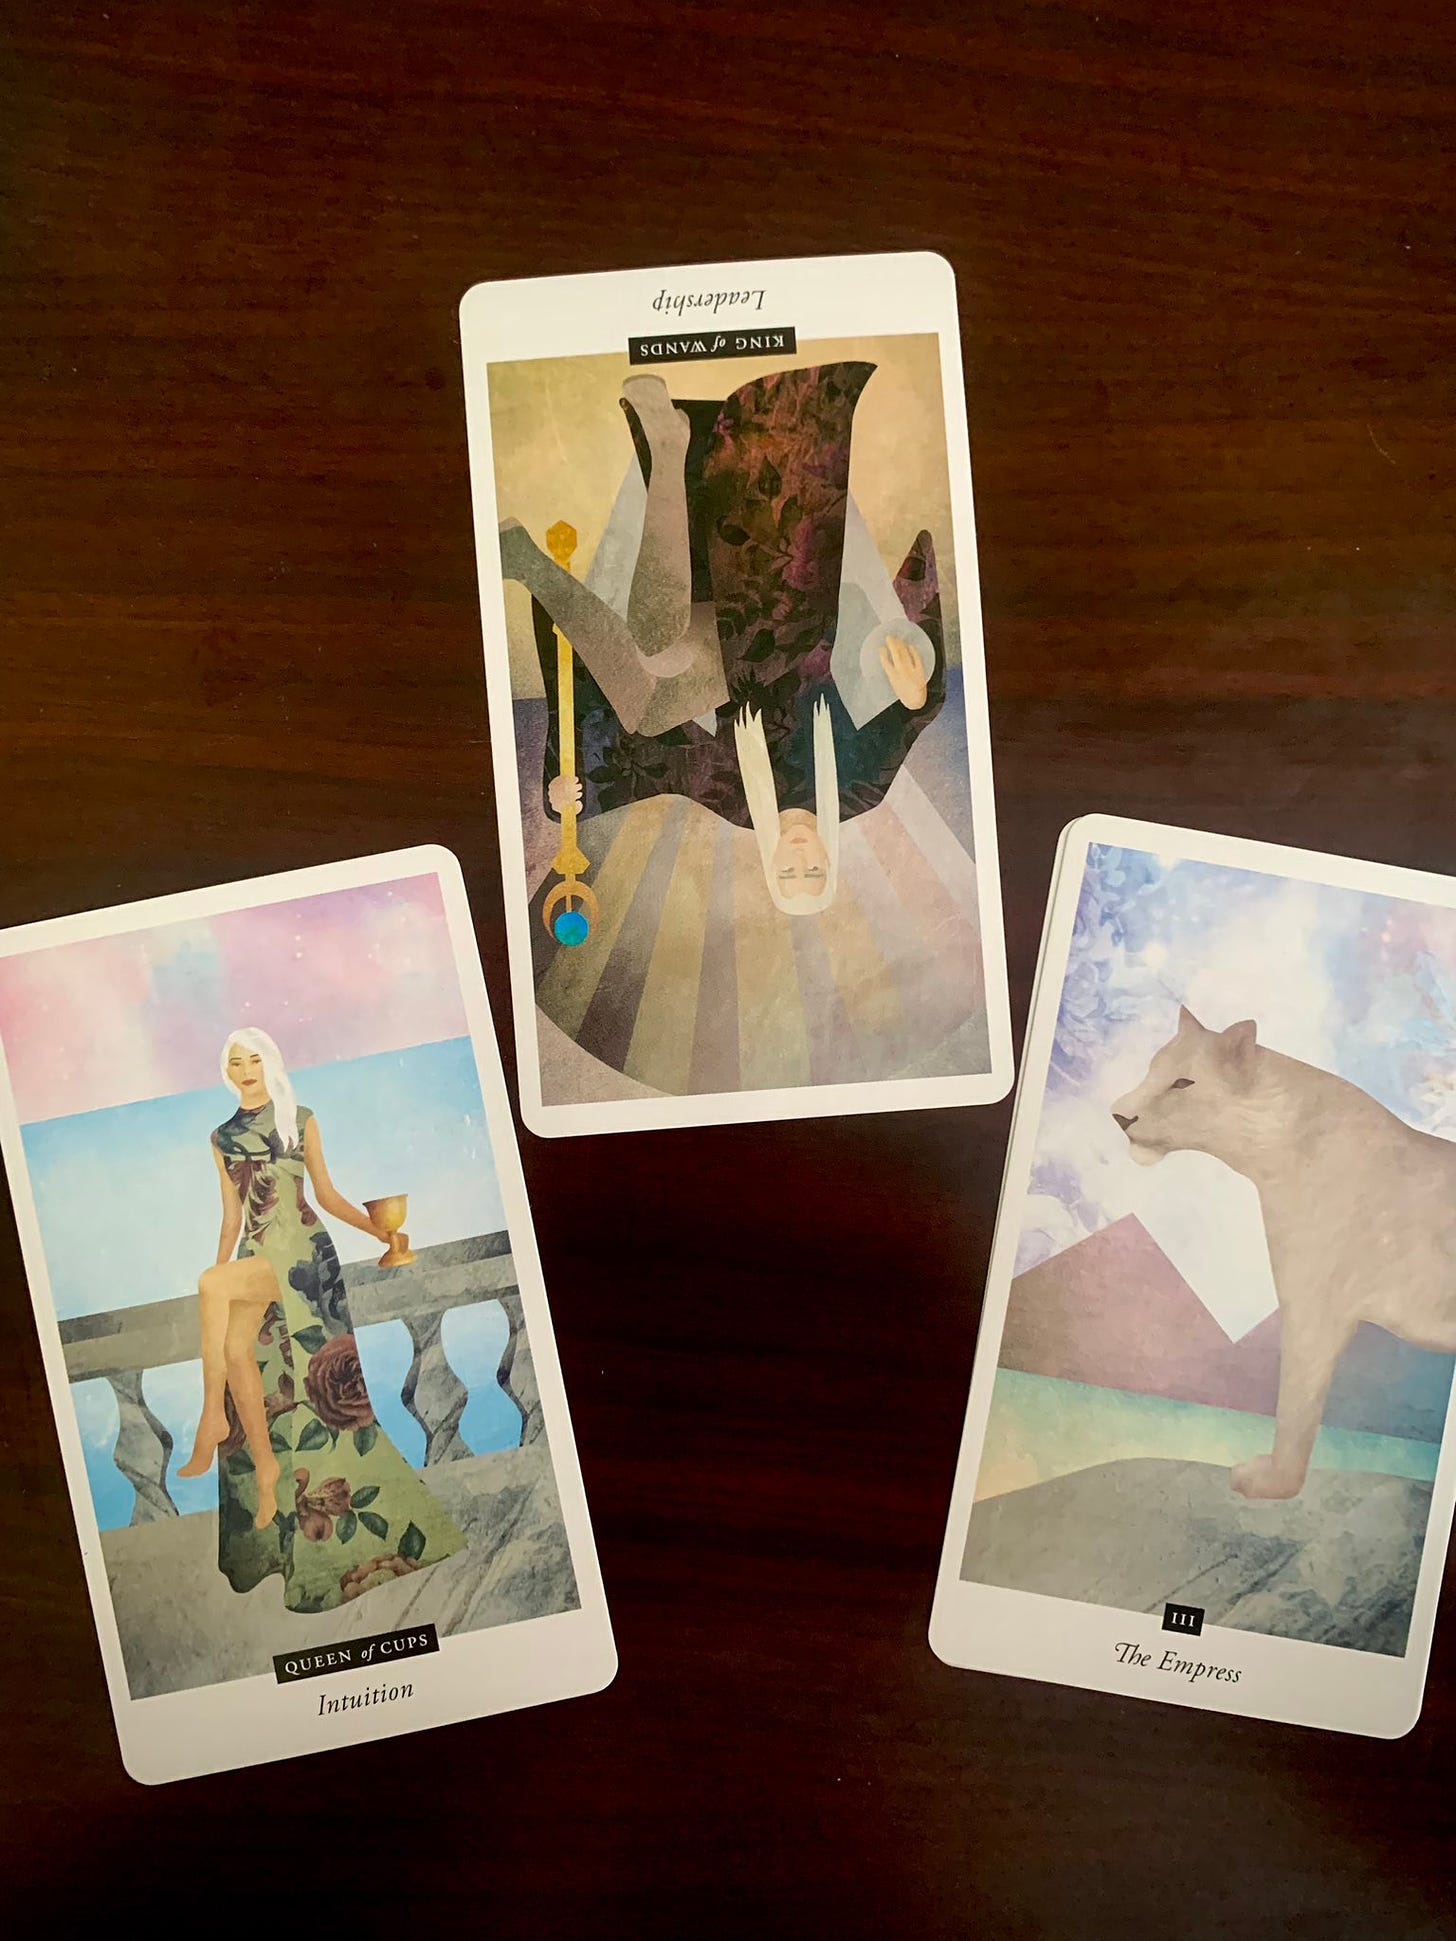 Three tarot cards on a brown table. The Queen and King of Wands and the Empress.